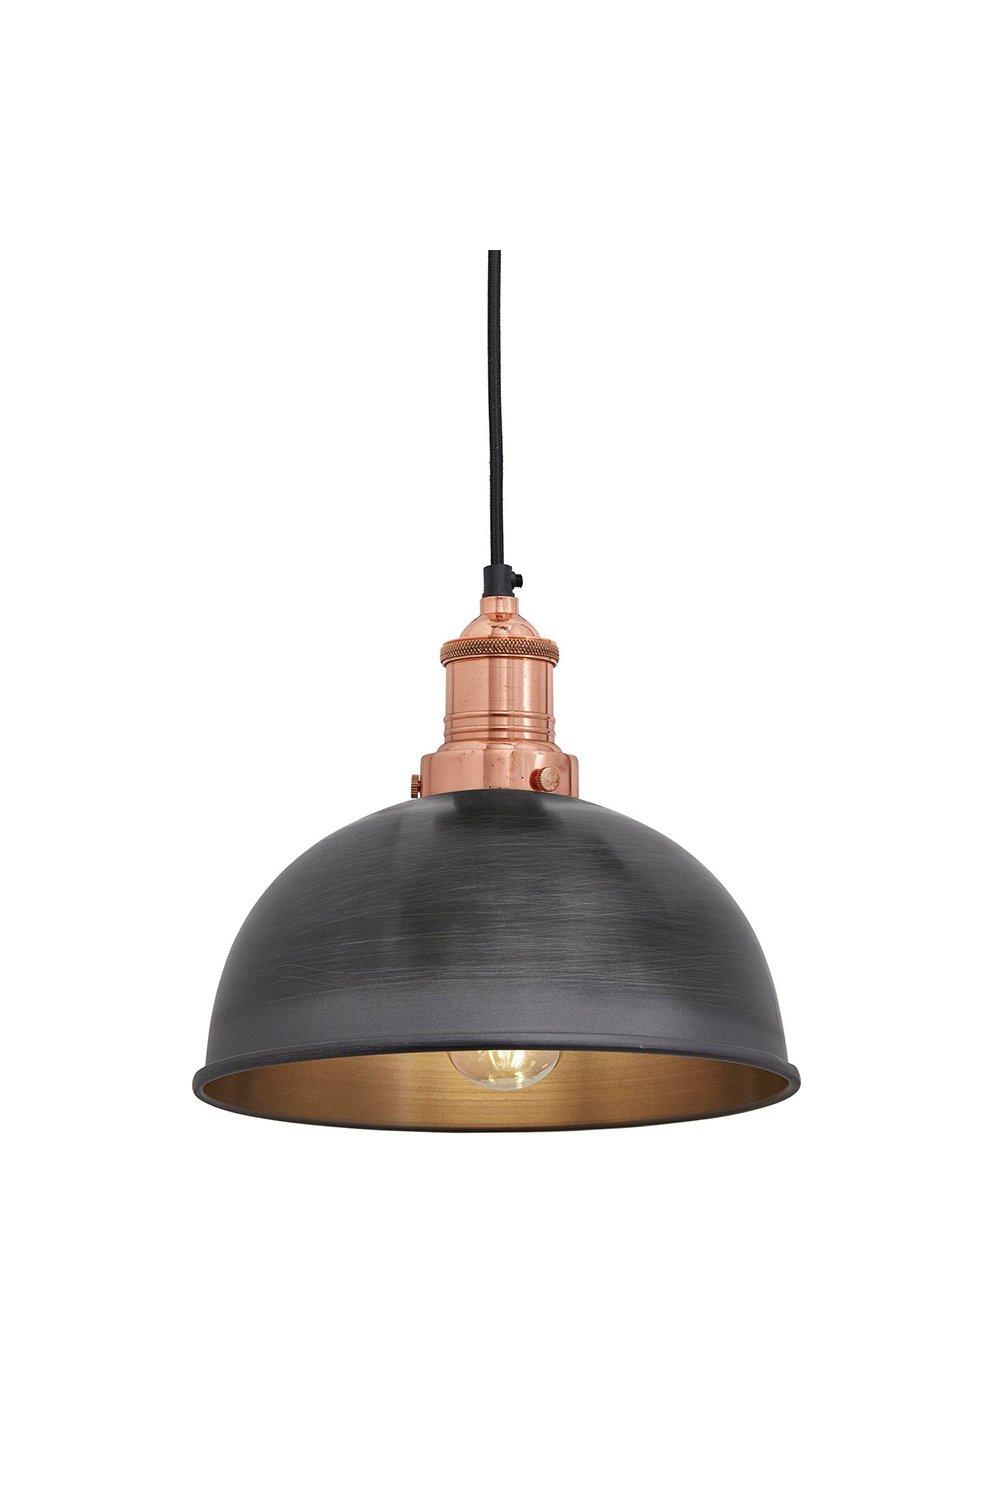 Brooklyn Dome Pendant, 8 Inch, Pewter, Copper Holder